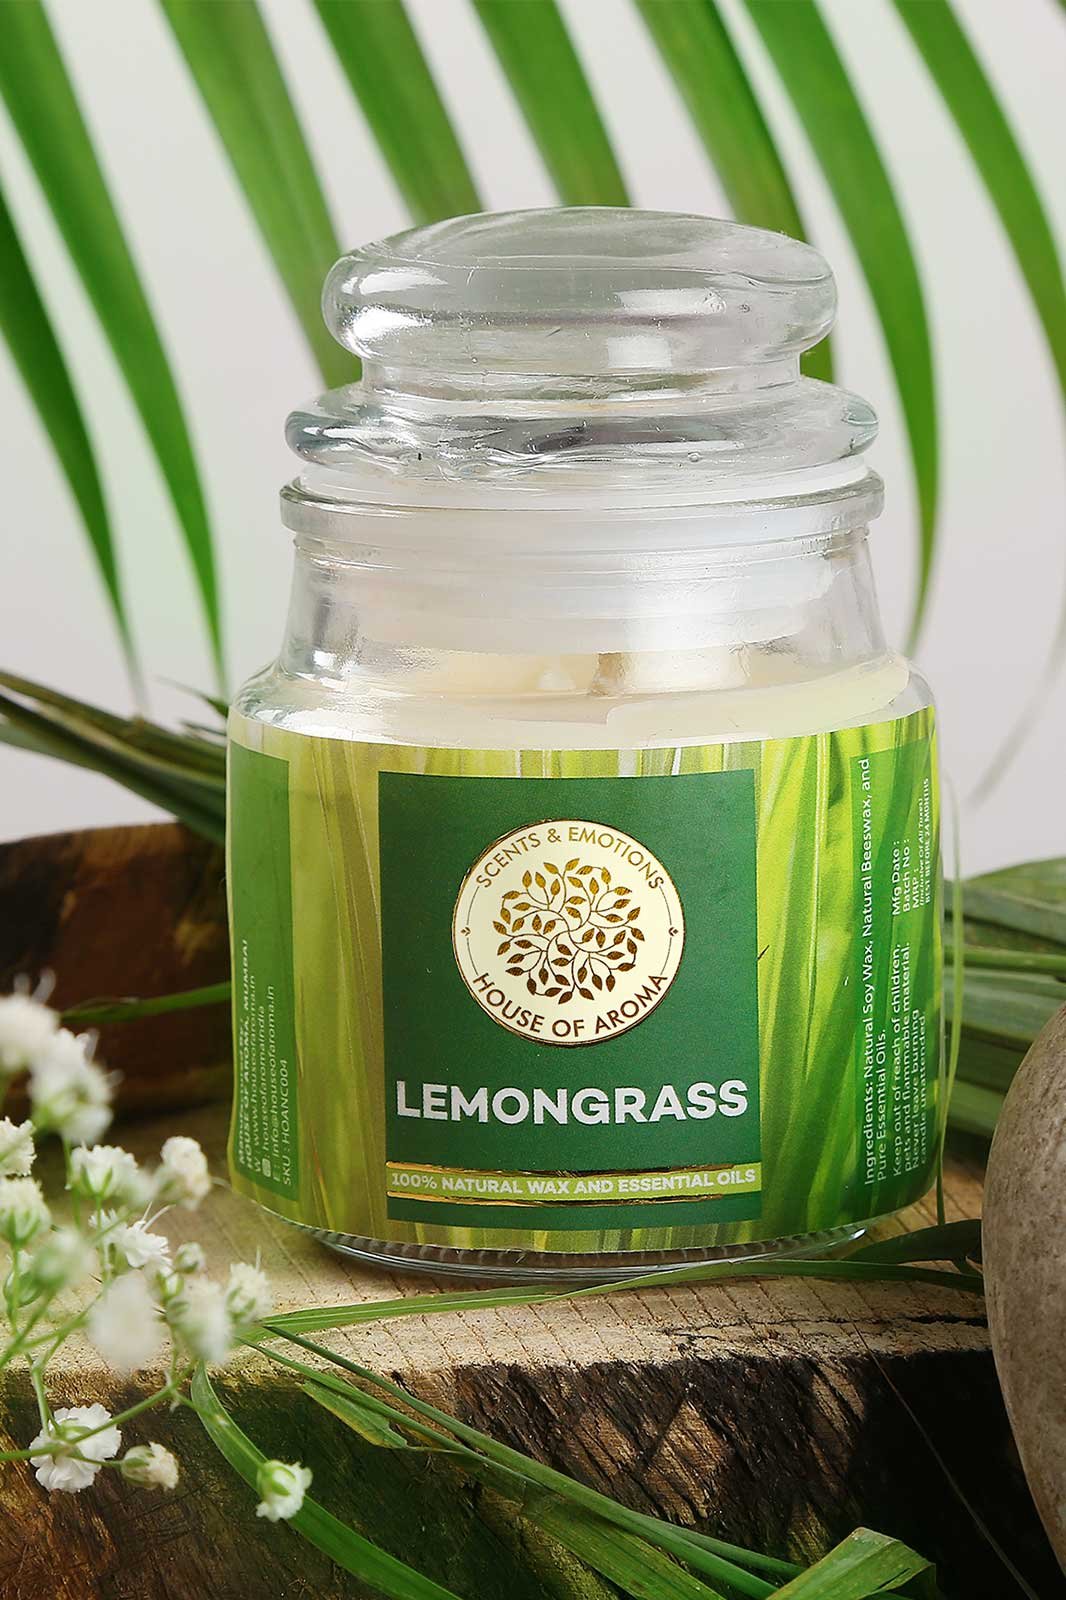 lemongrass bell jar candle, lemongrass wax candles, lemongrass tea candle, lemongrass soy candle, lemongrass pillar candle, lemongrass lavender candle, lemongrass ginger candle, lemongrass essential oil candle, lemongrass candles, lemongrass candle scent, lemongrass candle fragrance oil, House of Aroma, scented candles online, home decor scented candles, organic scented candles, online scented candles, natural scented beeswax candles, aroma scented candles, scented candle brand, aroma diffuser candle